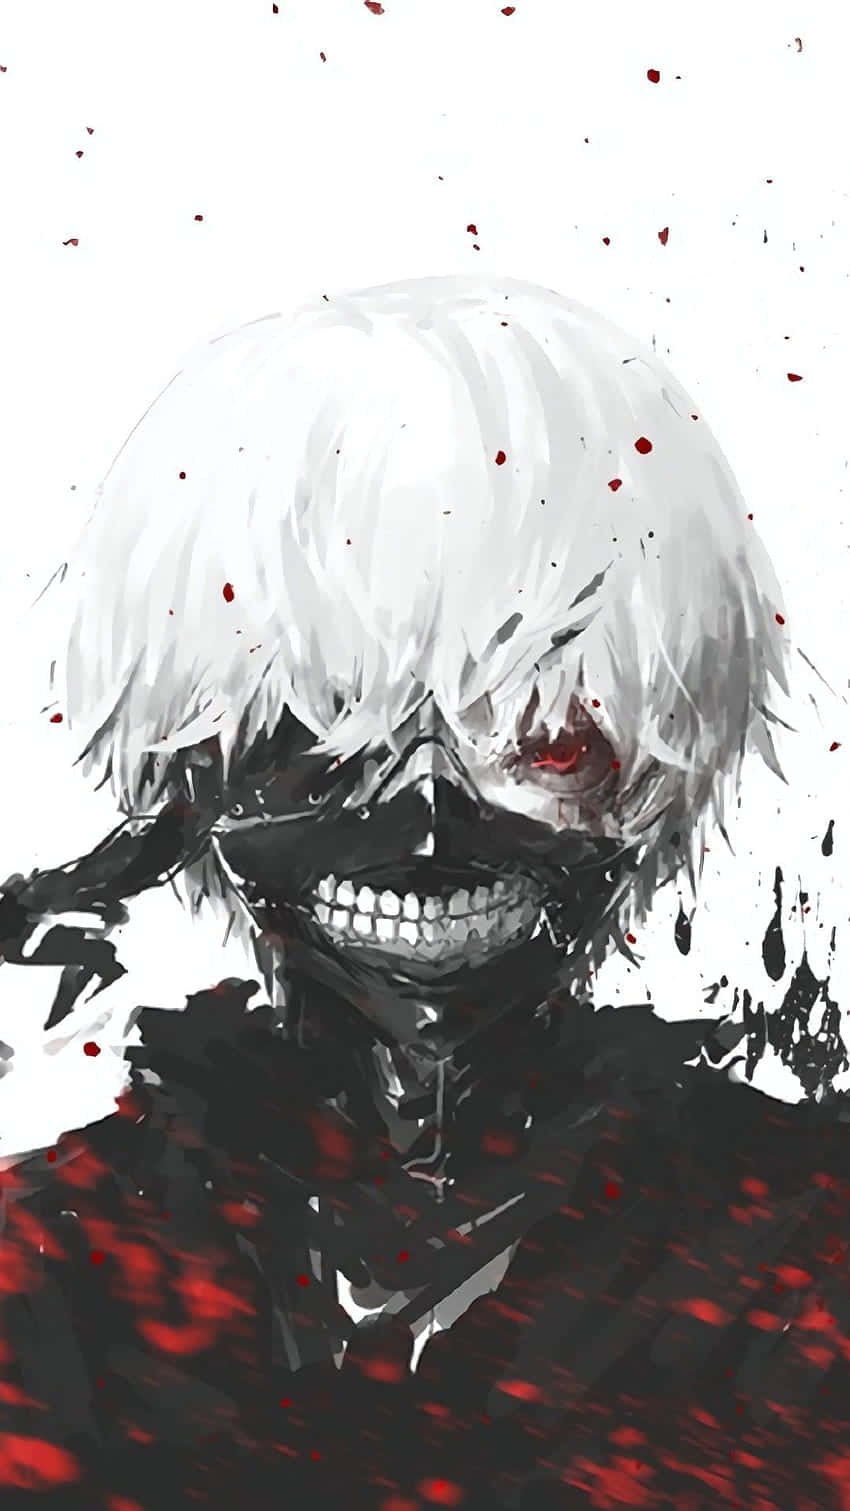 The world of Tokyo Ghoul is full of mystery and danger